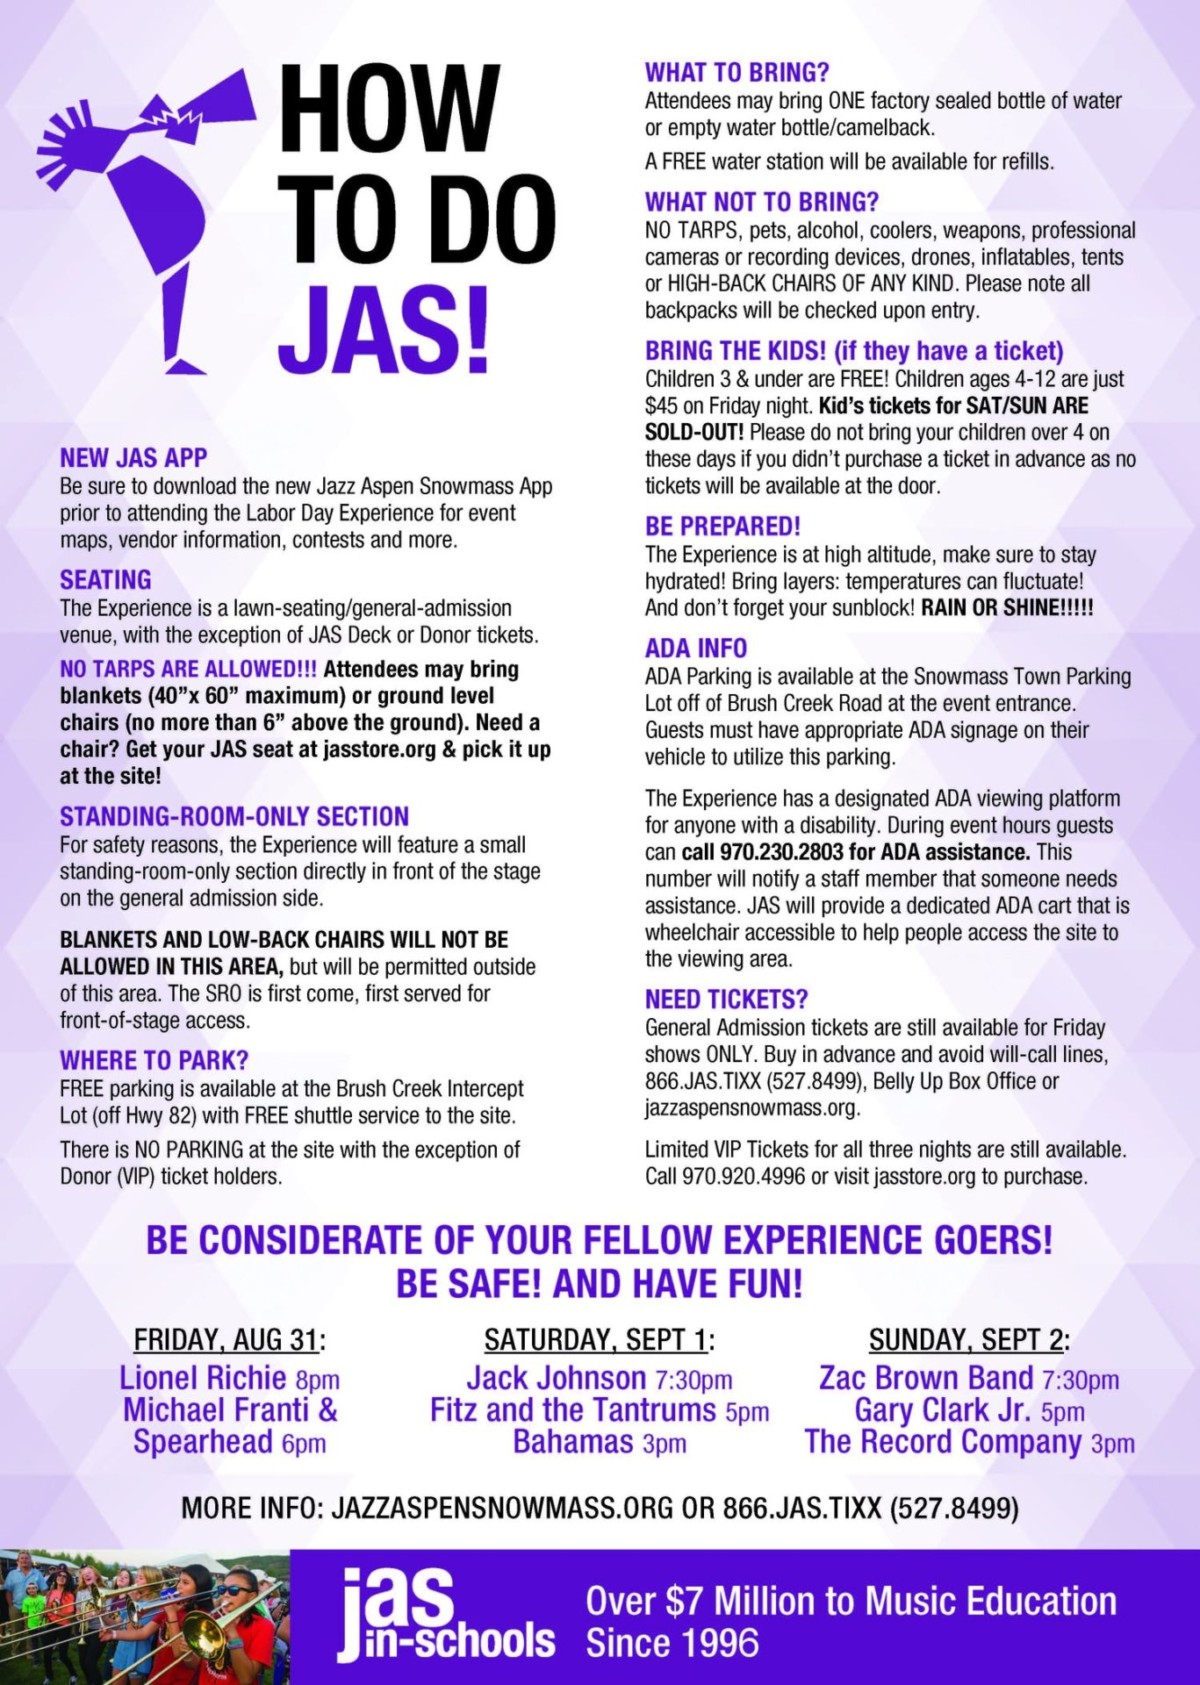 How To's for the JAS Labor Day Experience JAS Jazz Aspen Snowmass